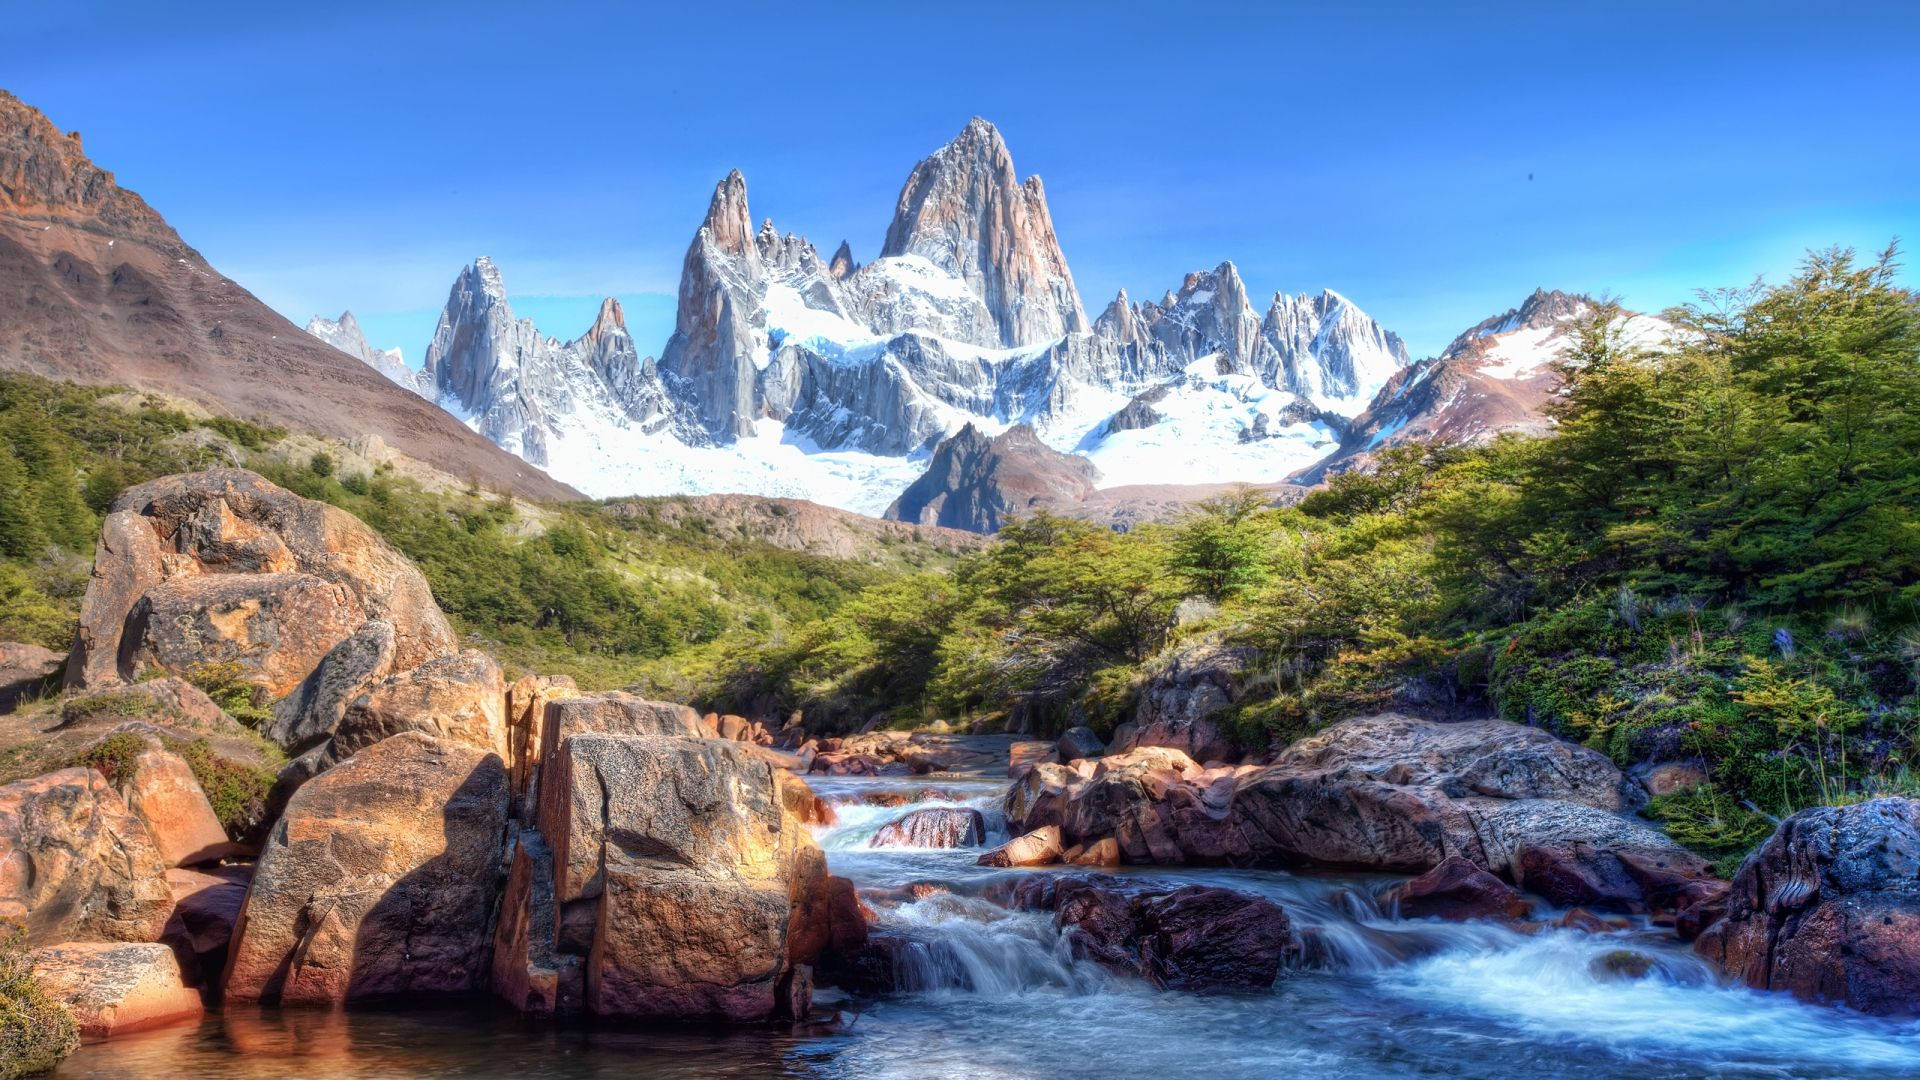 Fitz Roy Rock Mountain rising above the Patagonian landscape Wallpaper